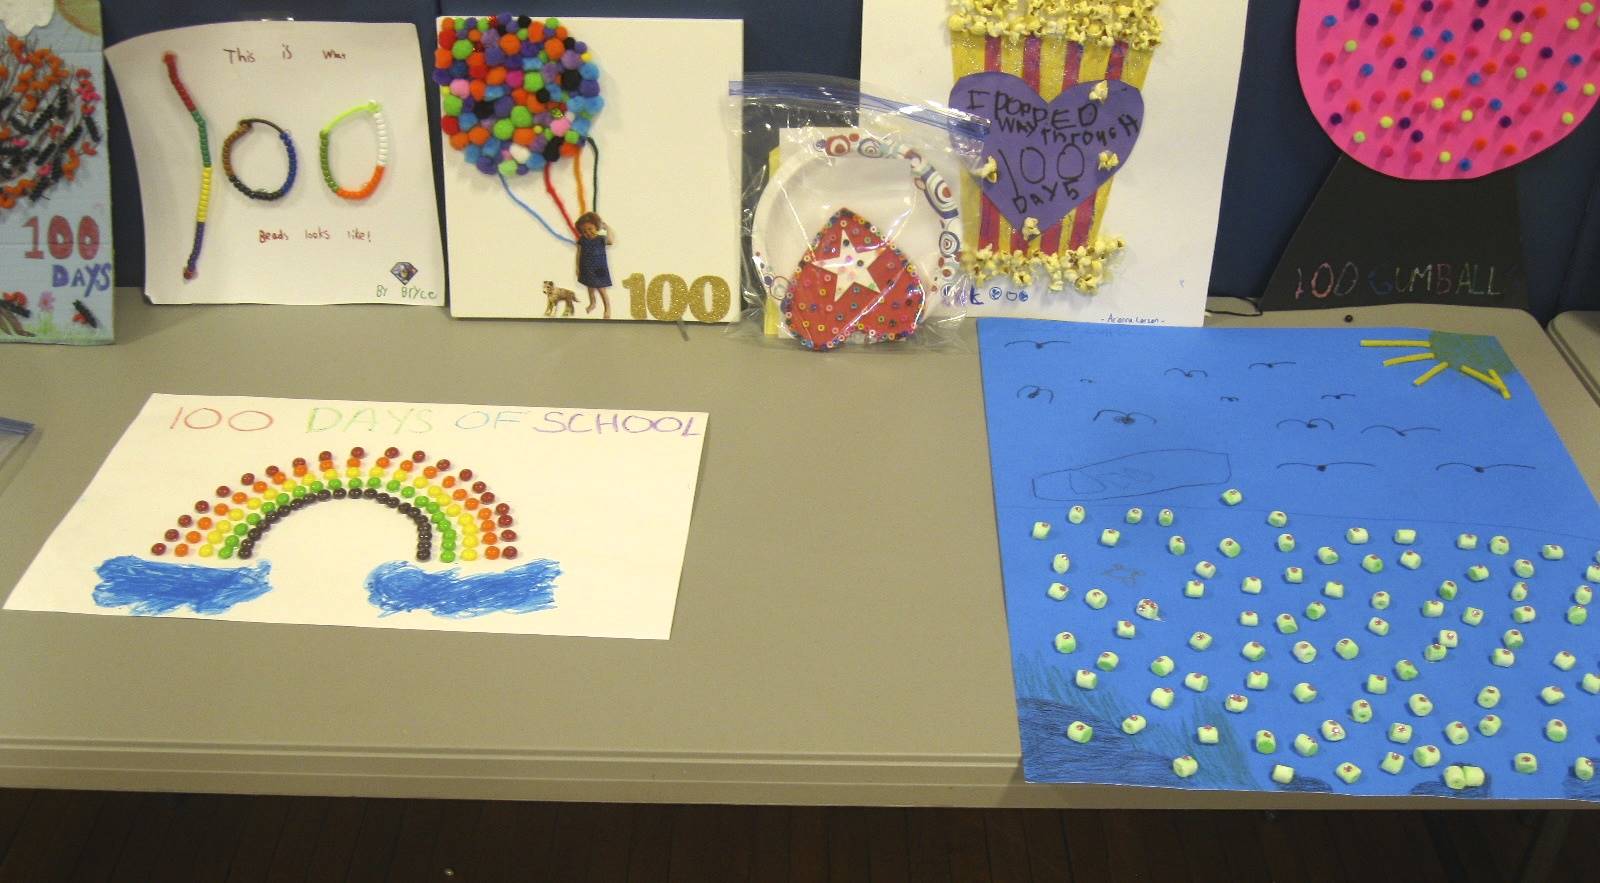 A rainbow, turtles, and balloons make up some 100 day art projects.